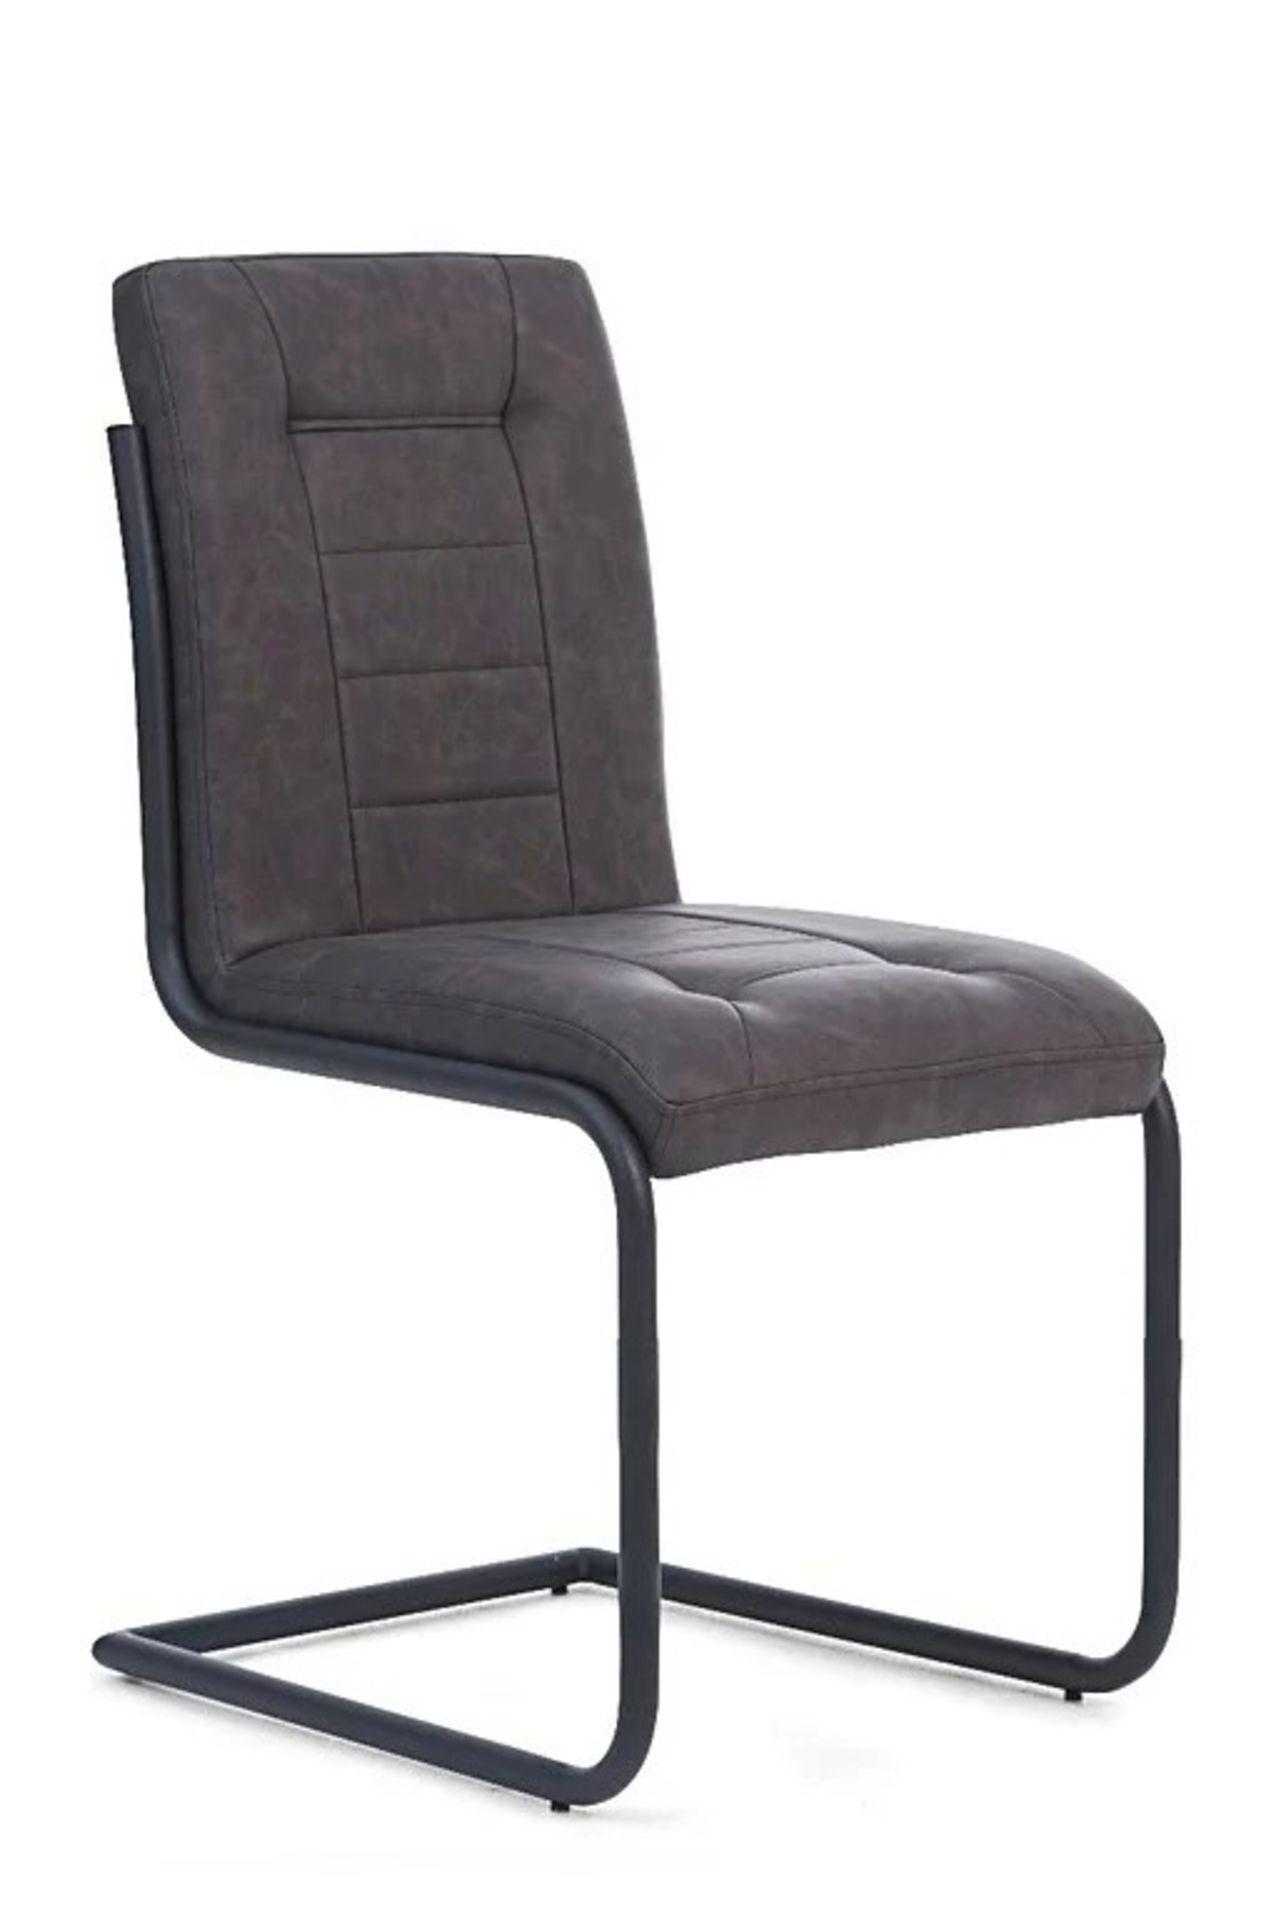 Alexa Brown Faux Leather Dining Chair Alexa is a sophisticated modern chair with square metal legs